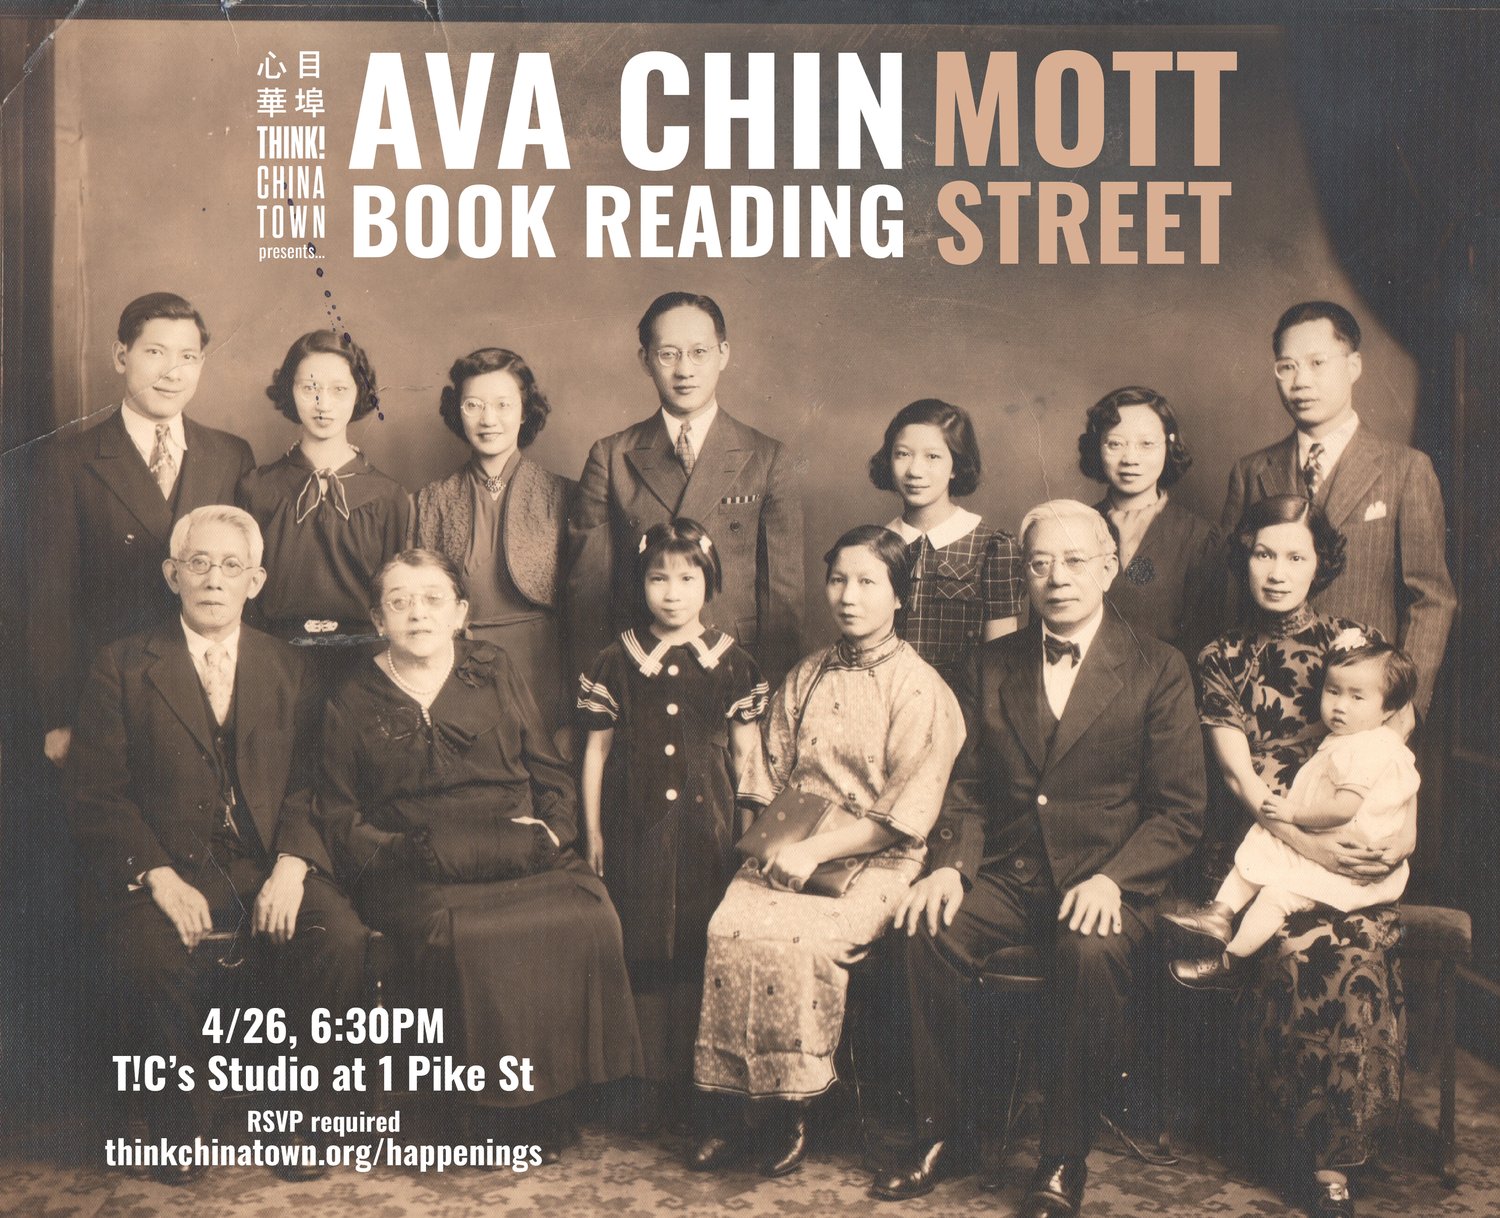 Think!Chinatown, AAWW, and Yu & Me Books Present: Mott Street by Ava Chin